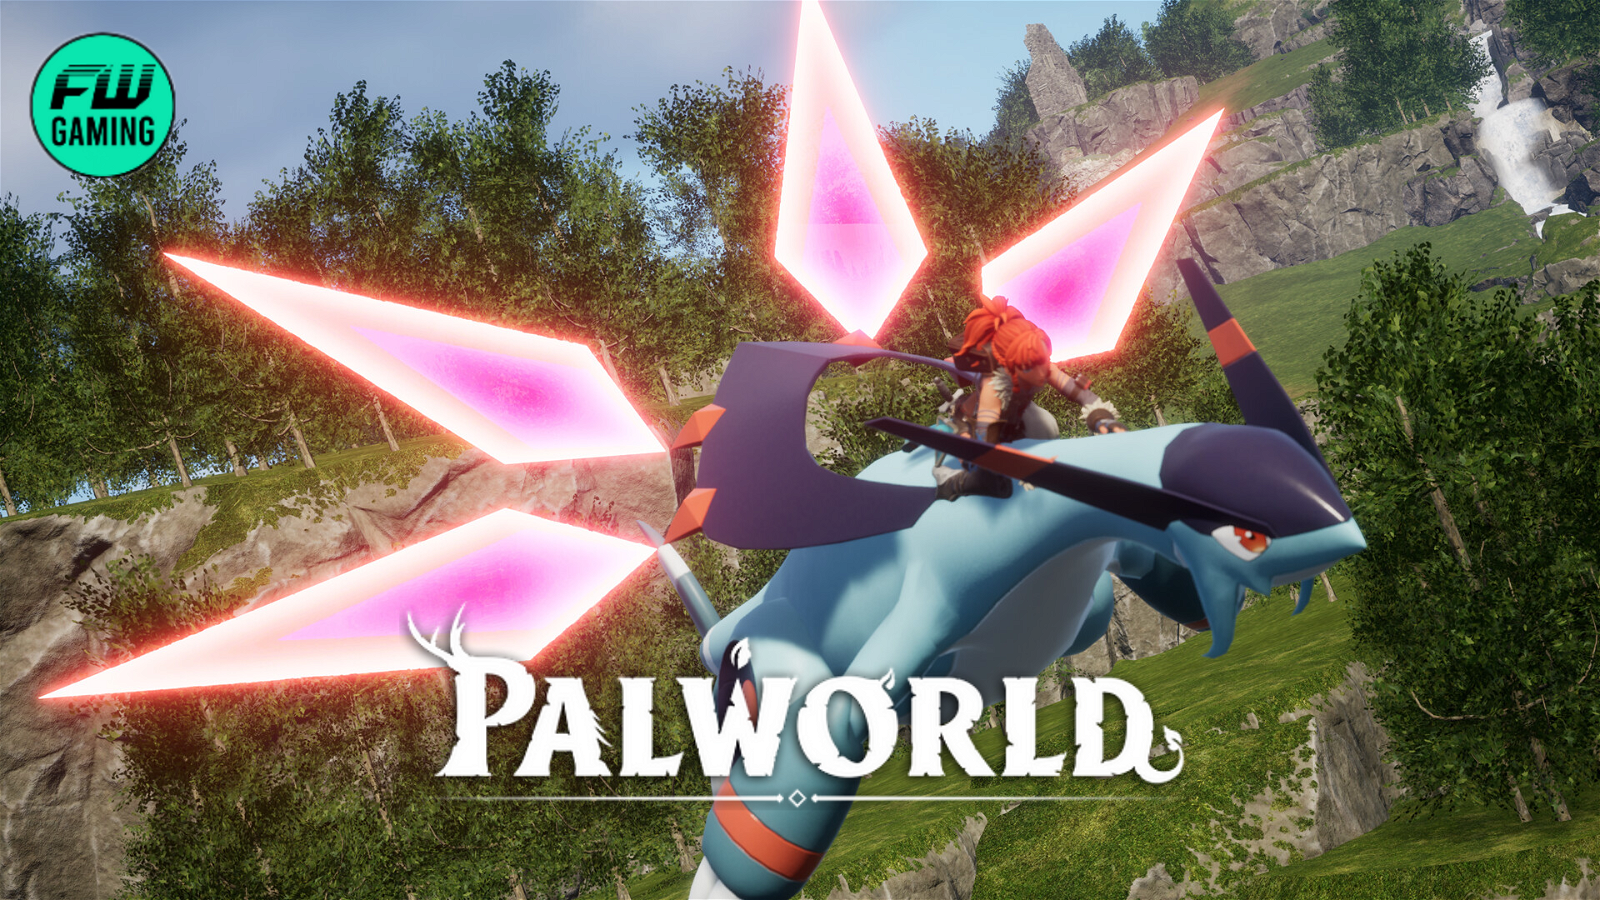 Palworld Glitch Is a Mixture of Genius and Game-Changing